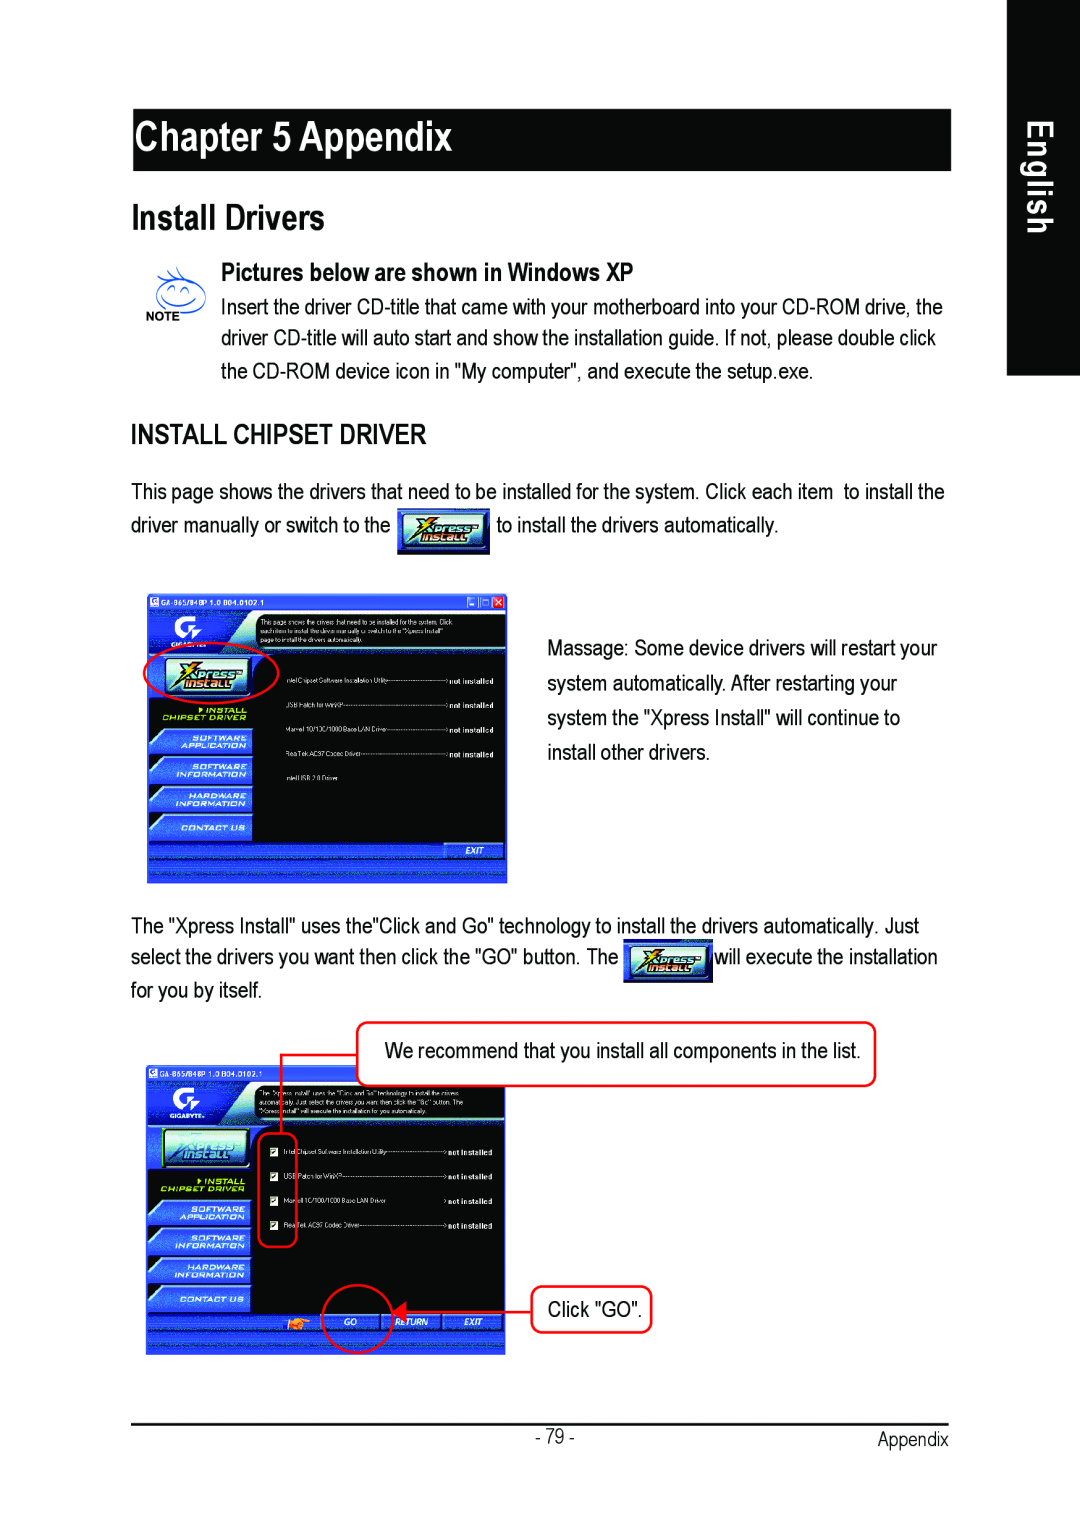 Gigabyte AGP 4X/8X manual Appendix, Install Drivers, English, Pictures below are shown in Windows XP 